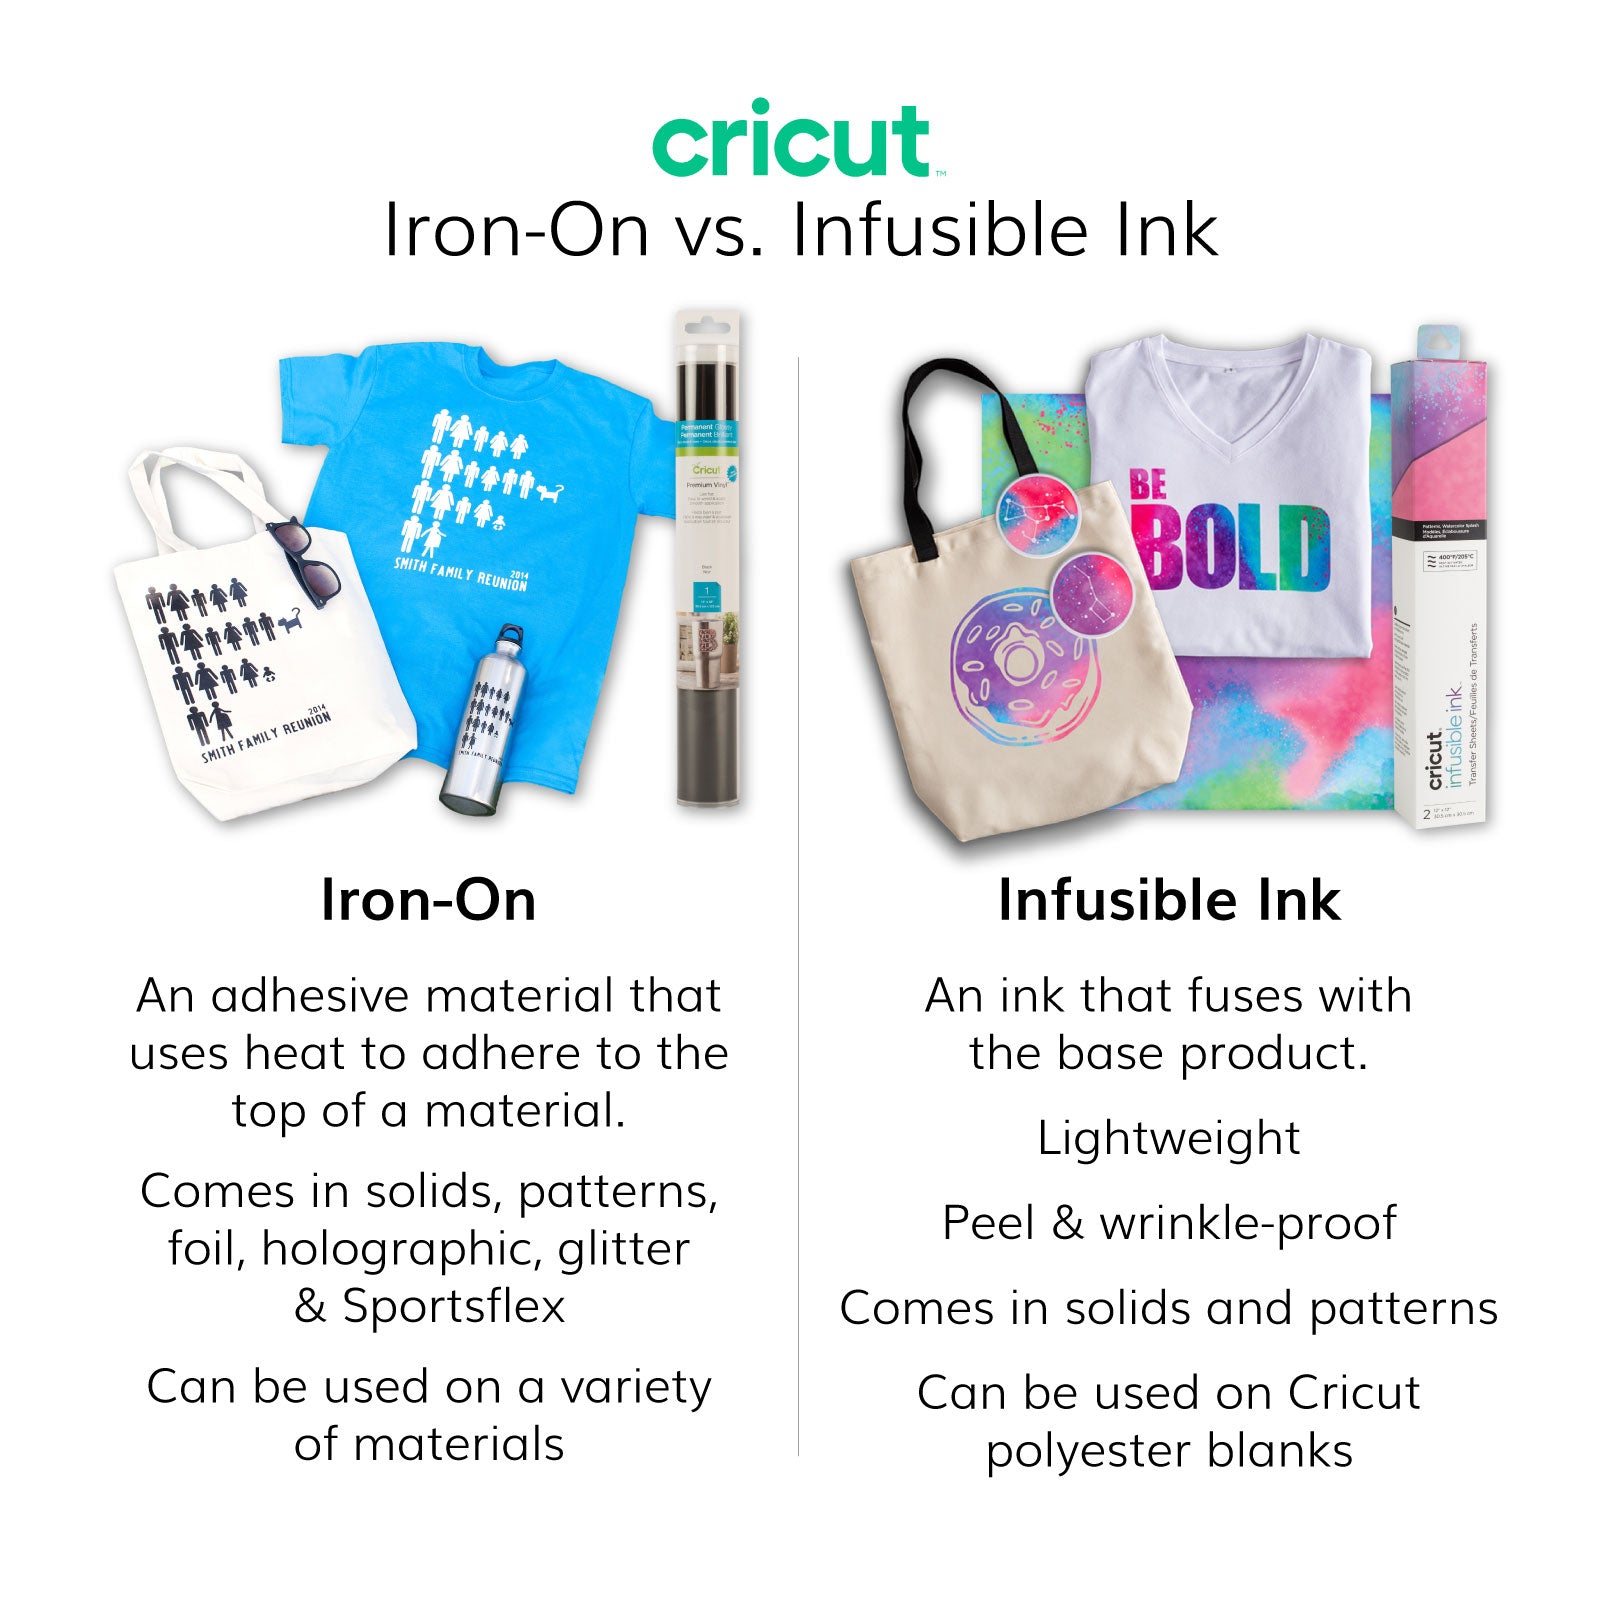 Cricut Infusible Ink Transfer Sheets, Bow Fairy Print - Damaged Package